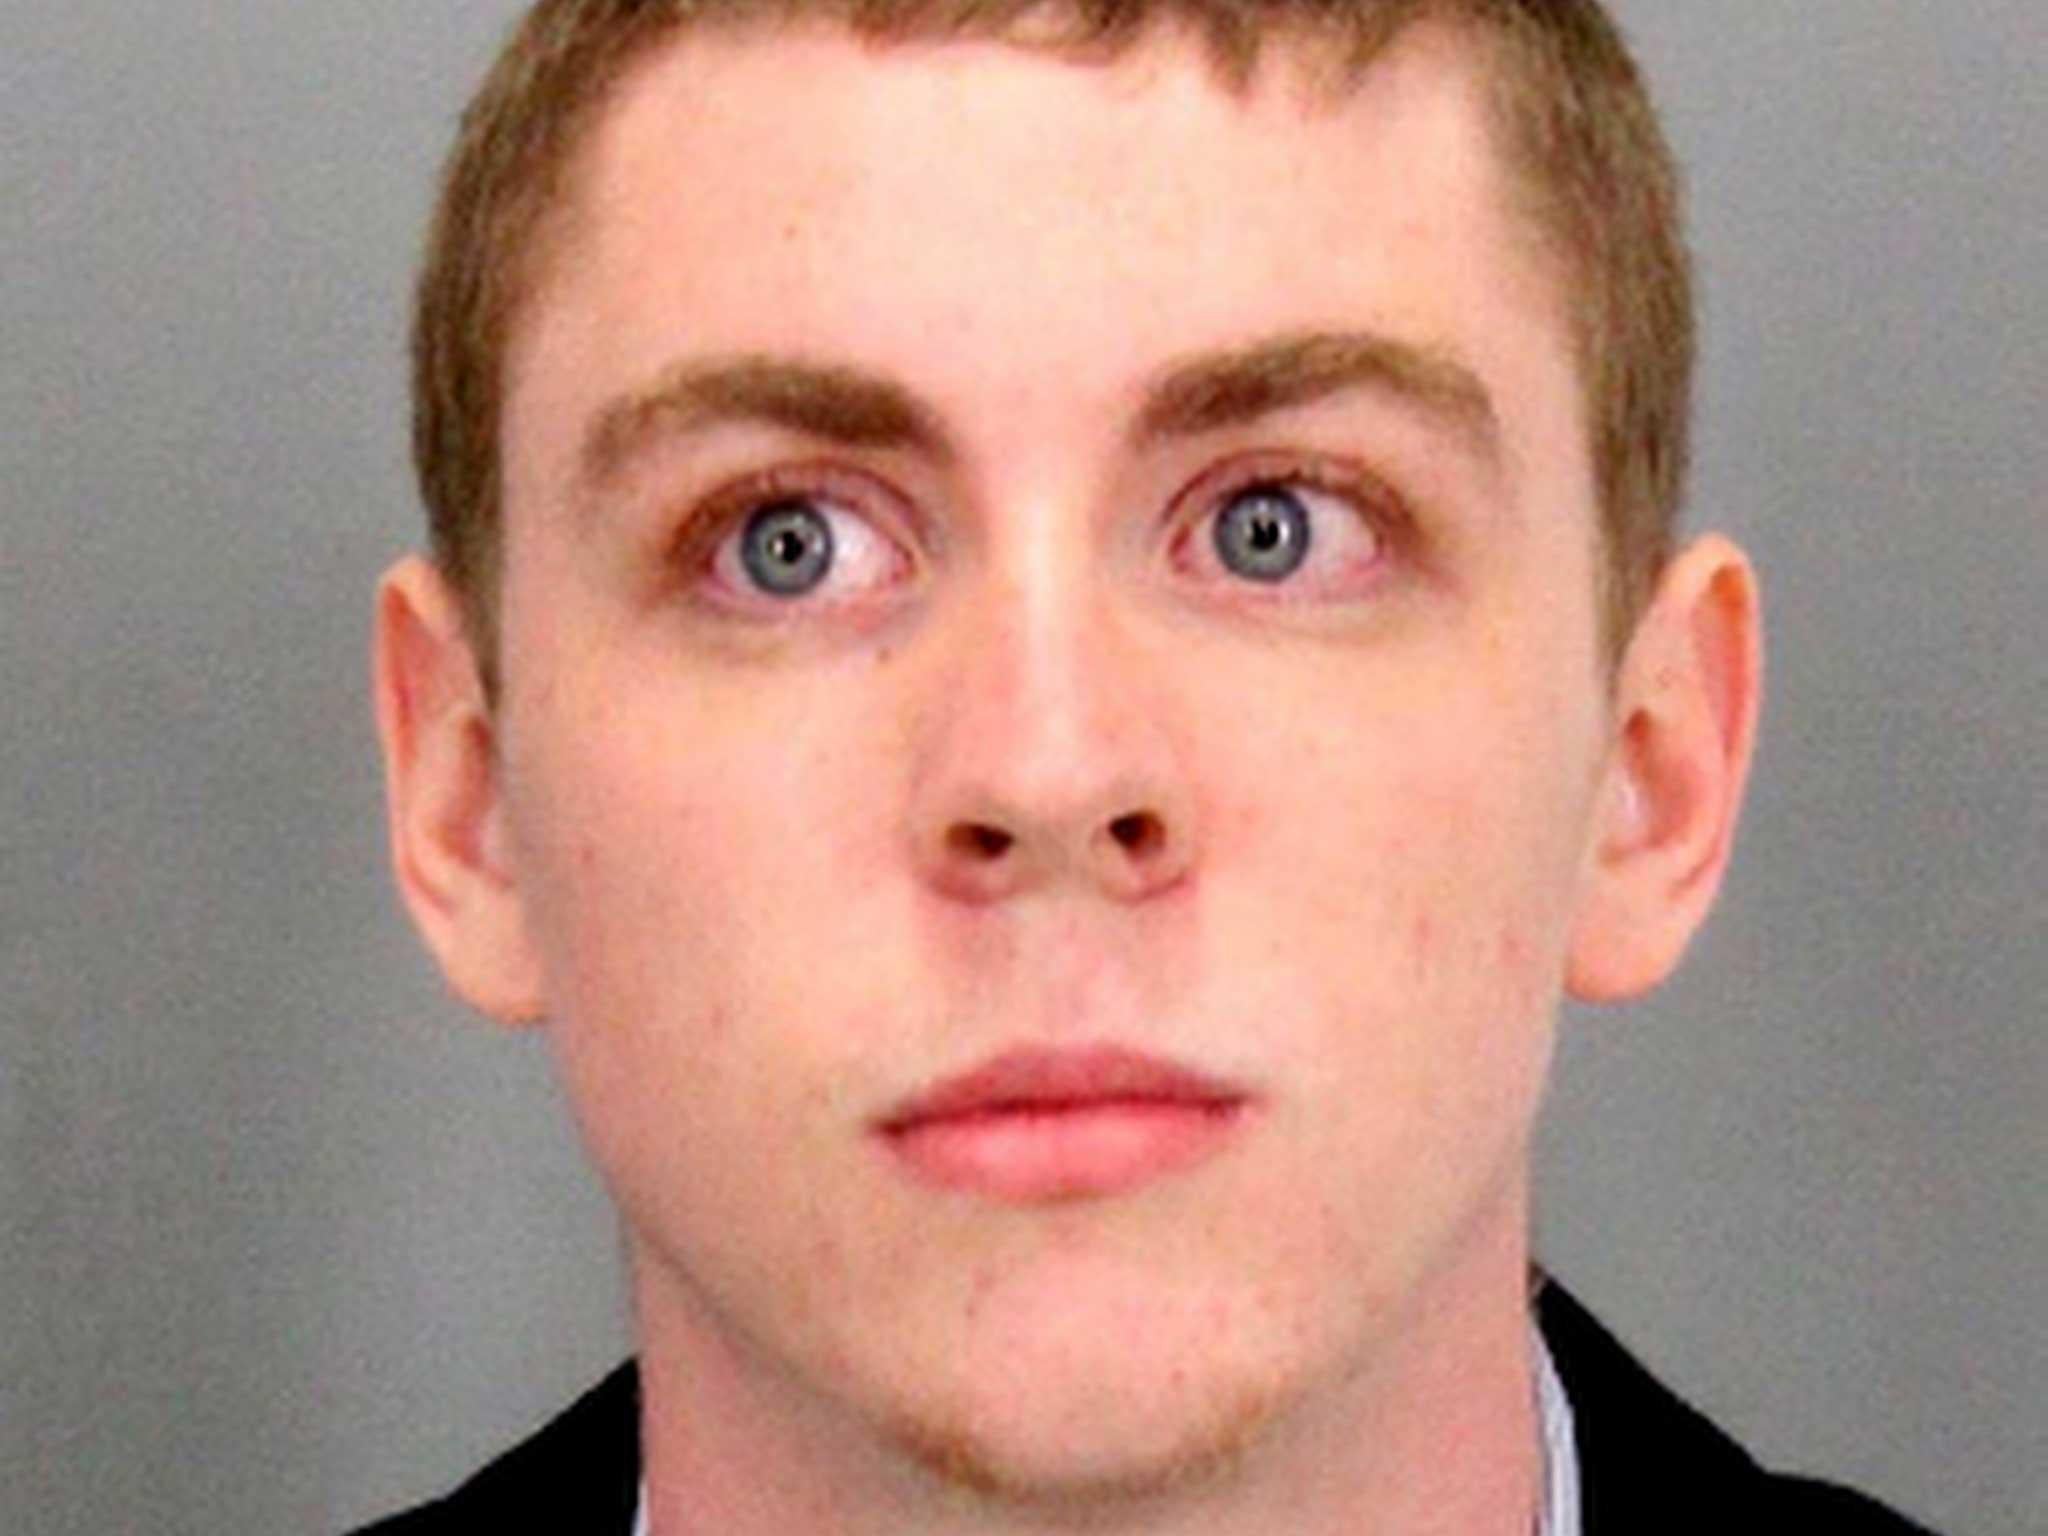 The Stanford University athlete will spend six months in jail for three sexual offences